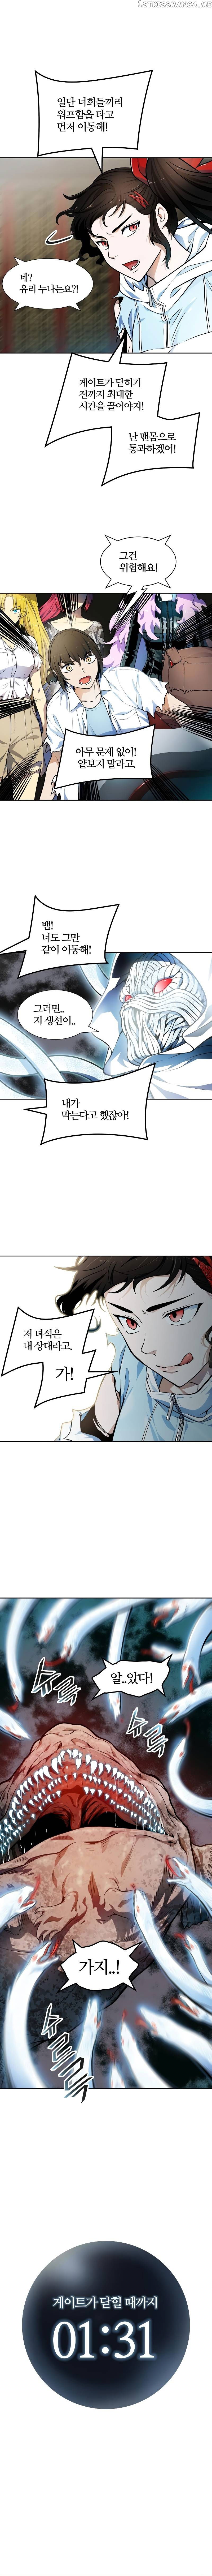 Tower of God Chapter 572 page 18